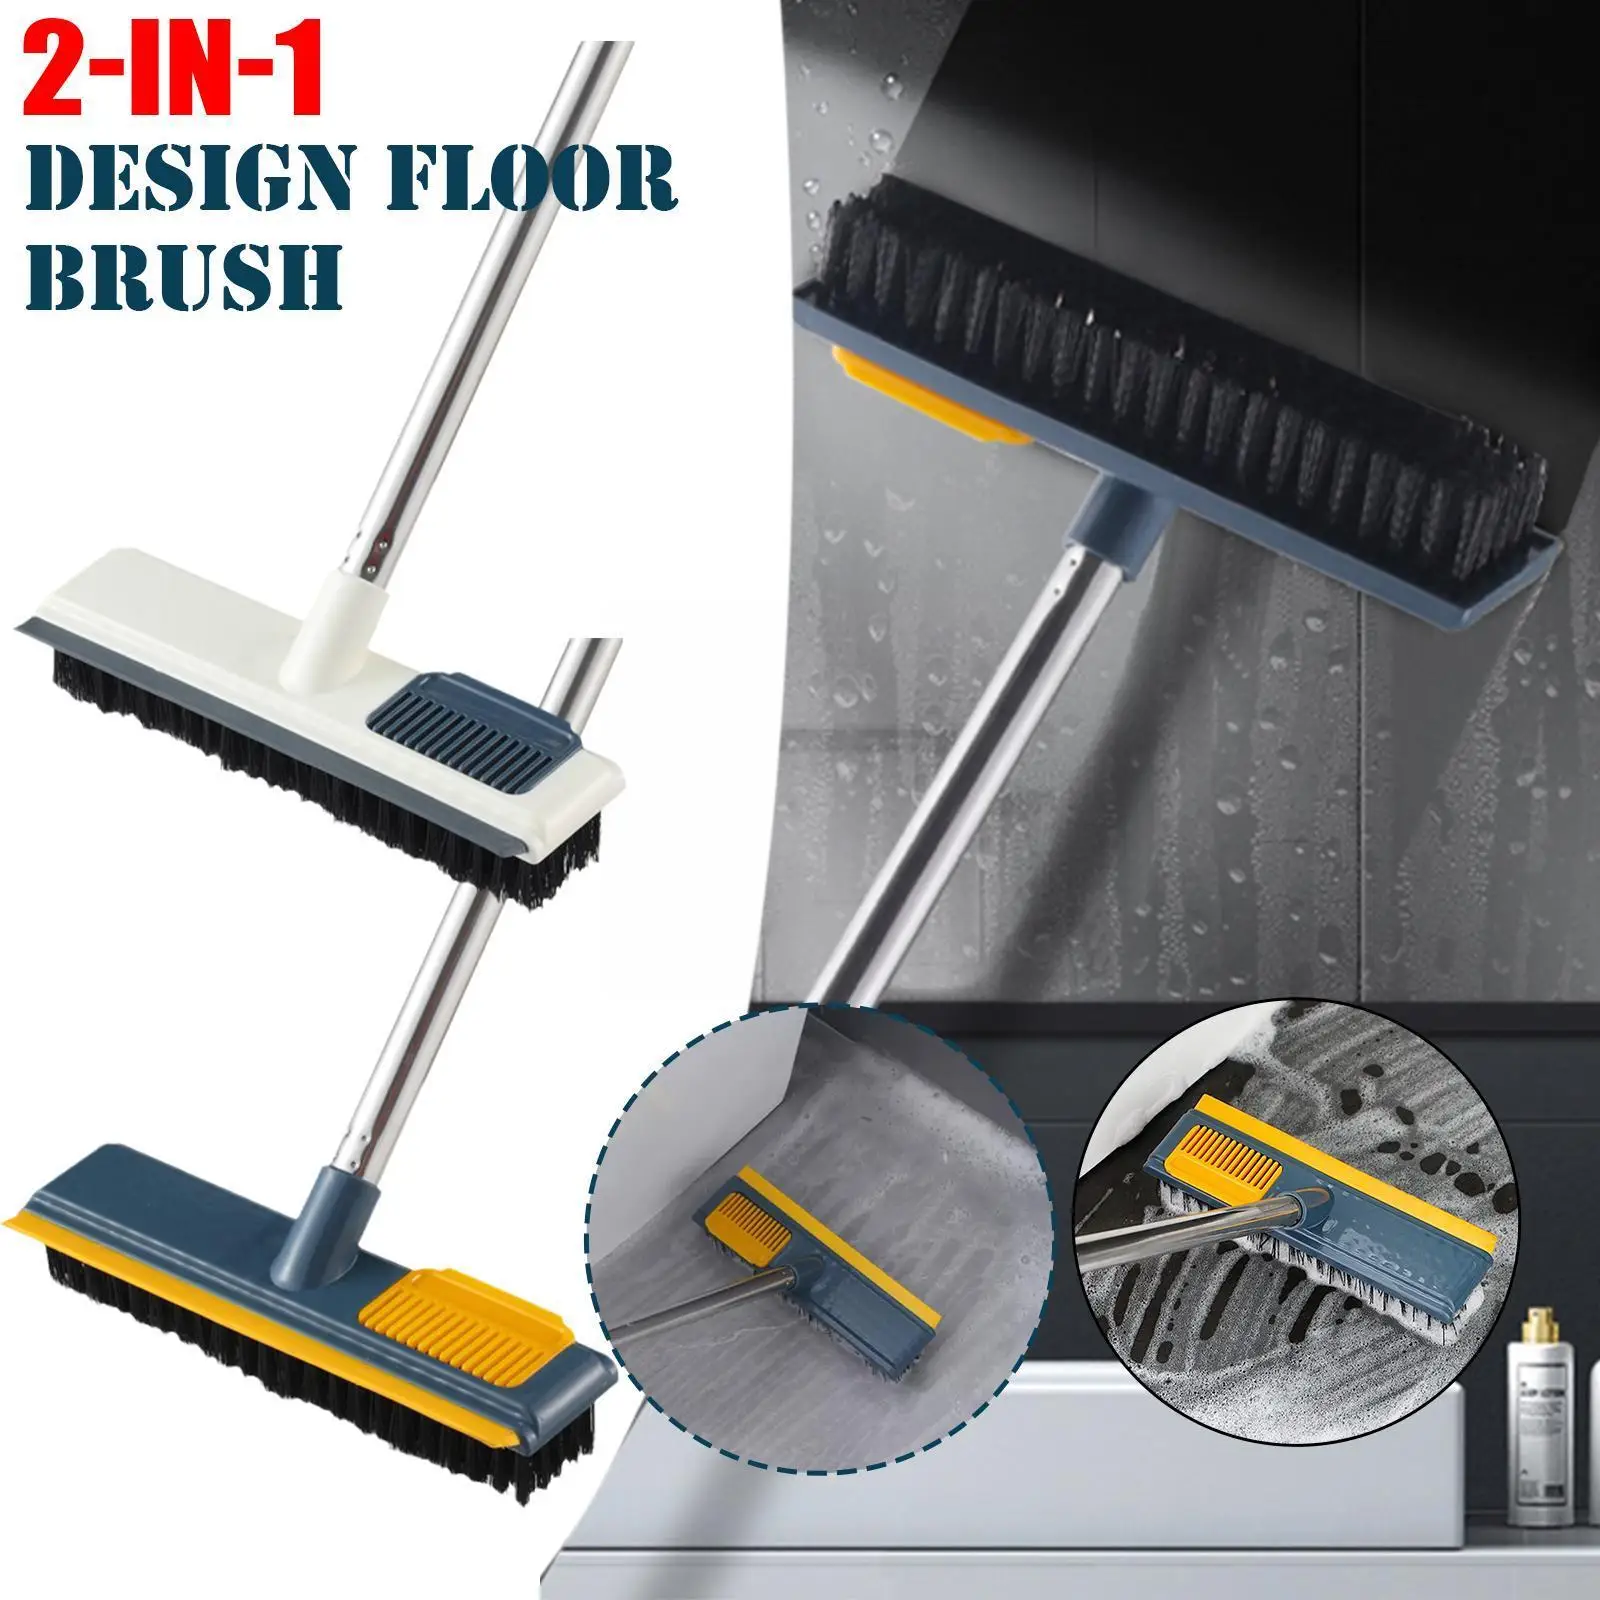 

Floor Scrub Brush 2 In 1 Cleaning Brush Long Handle Tools Cleaning Broom Tile Brush Removable Wiper Magic Squeegee Kitchen F1L5